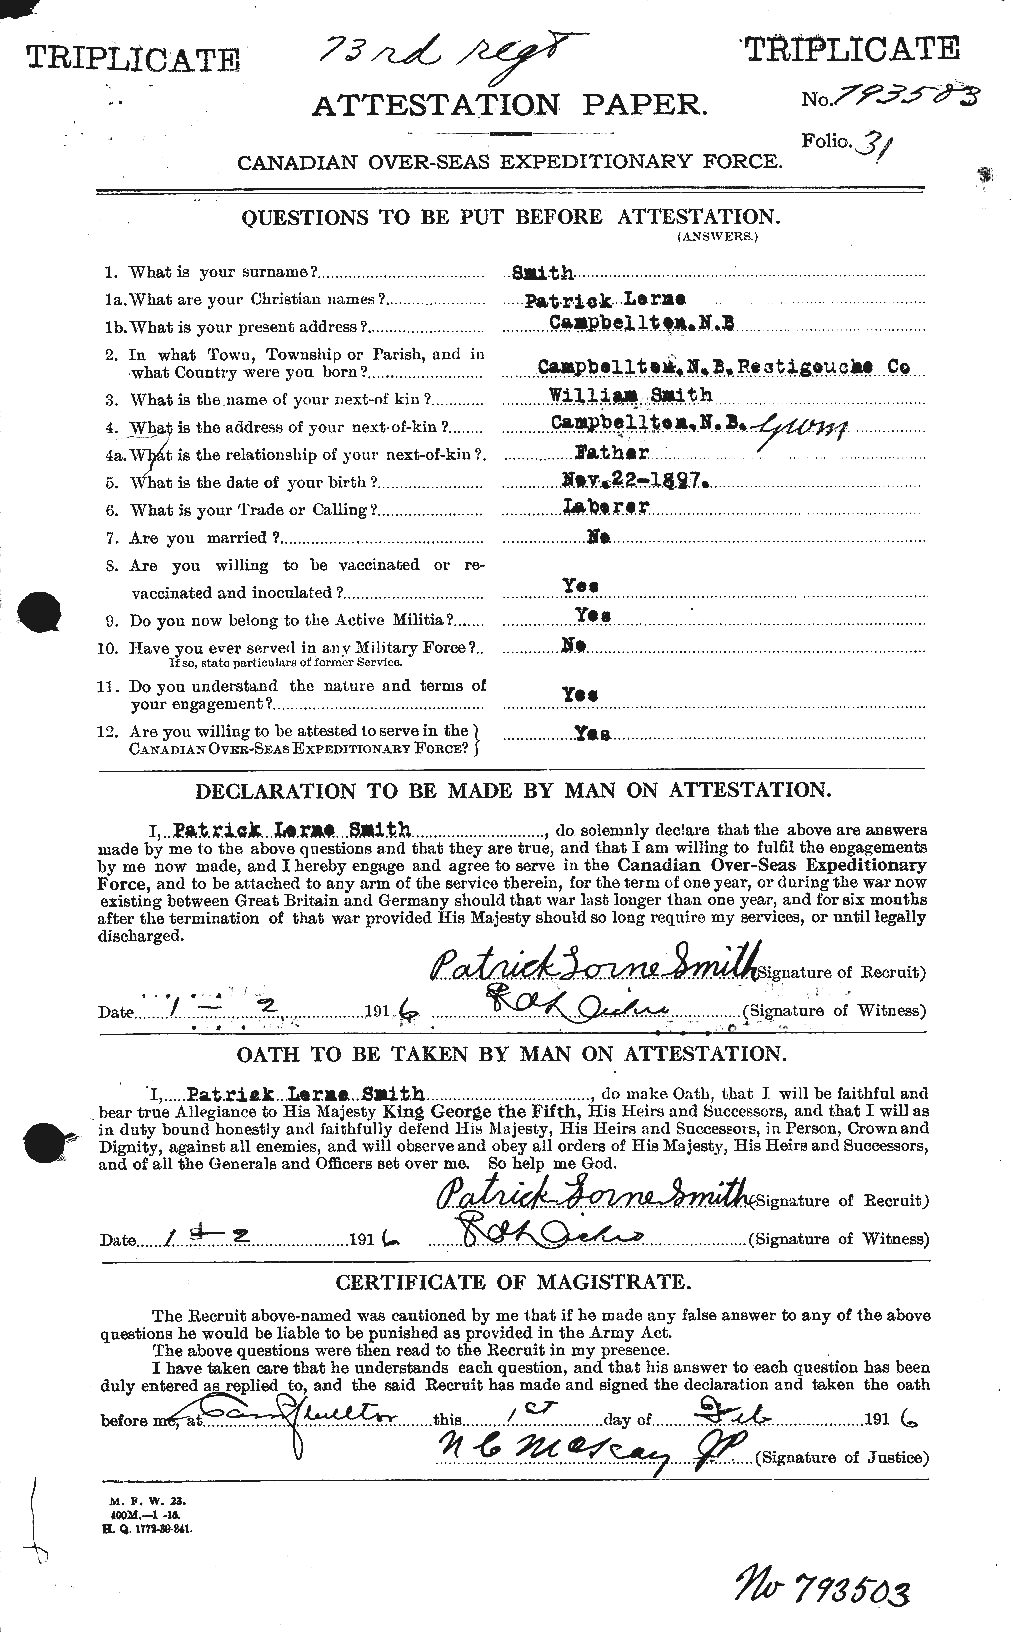 Personnel Records of the First World War - CEF 622136a